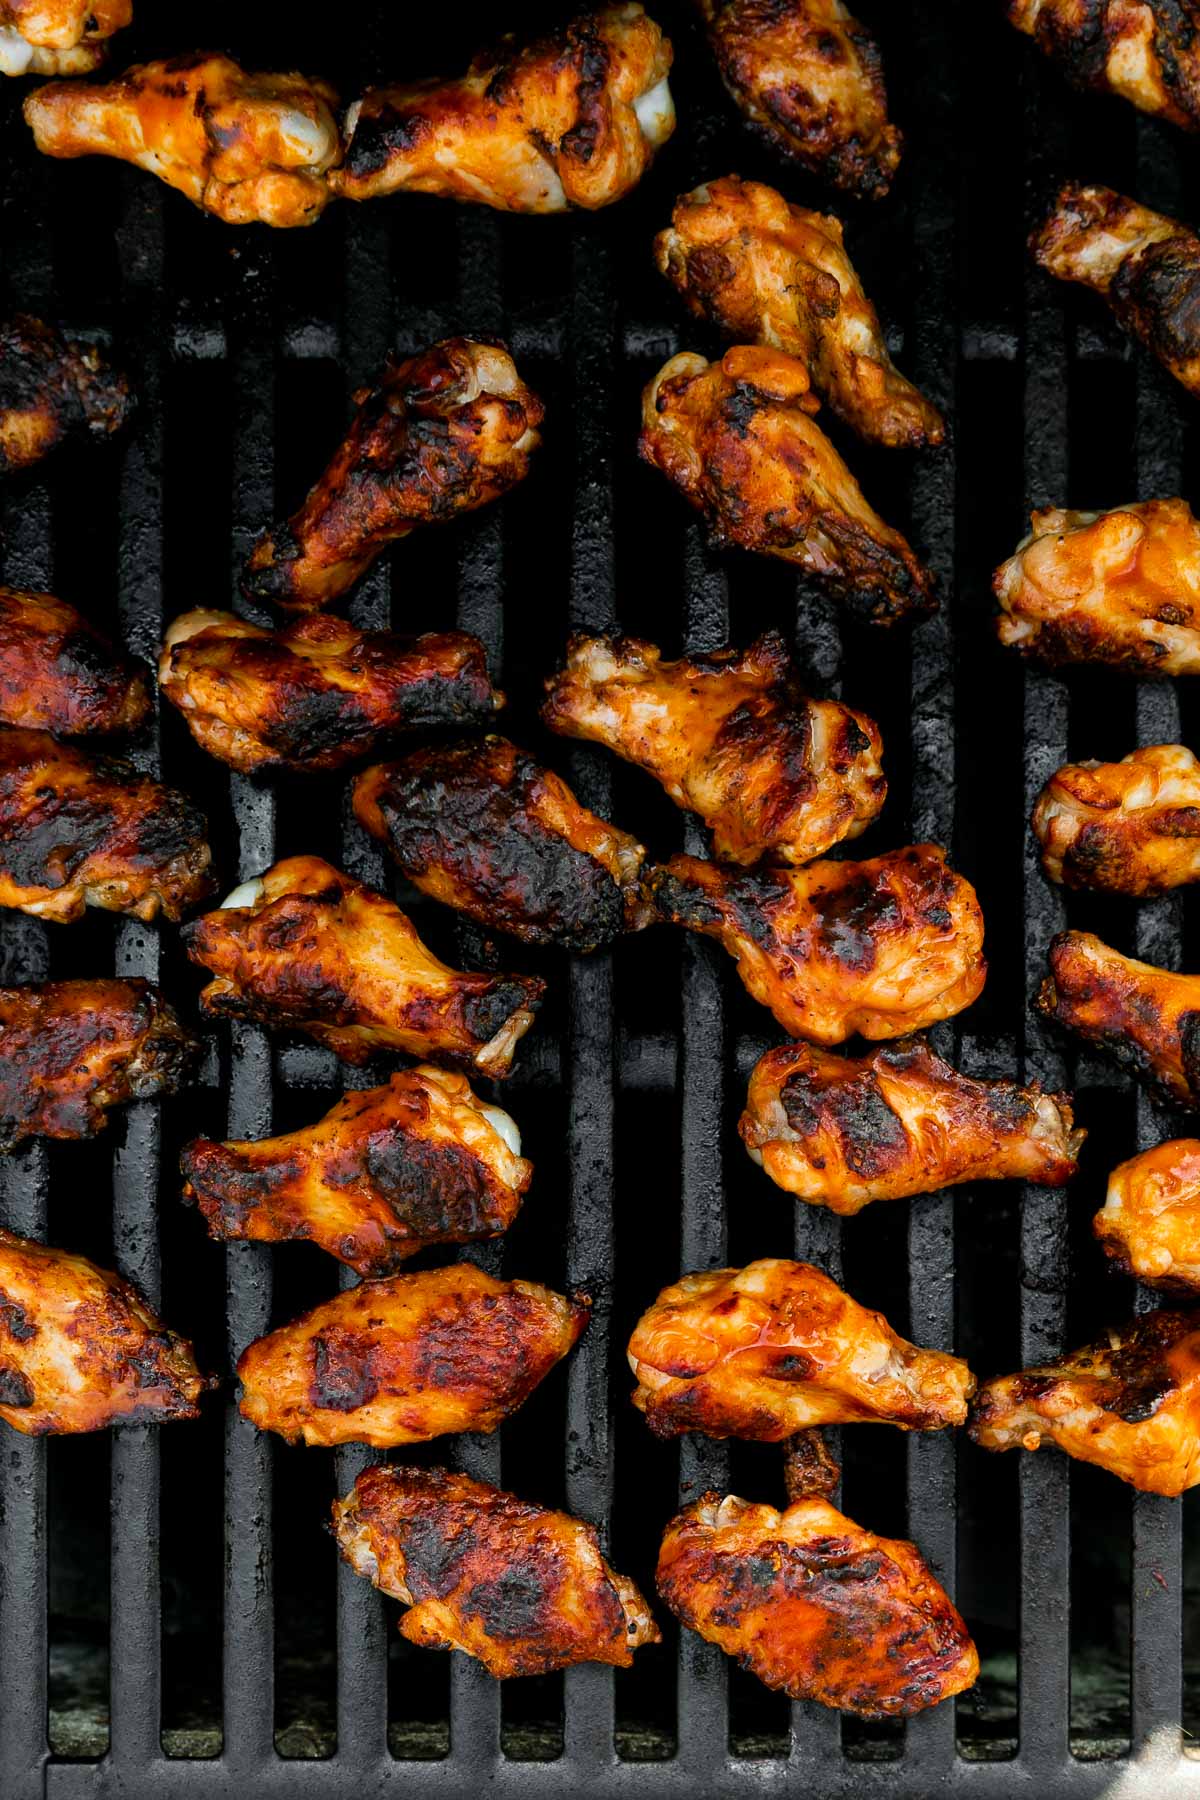 An overhead shot of grilled buffalo wings arranged on a gas grill over direct heat to achieve a char grill finish.